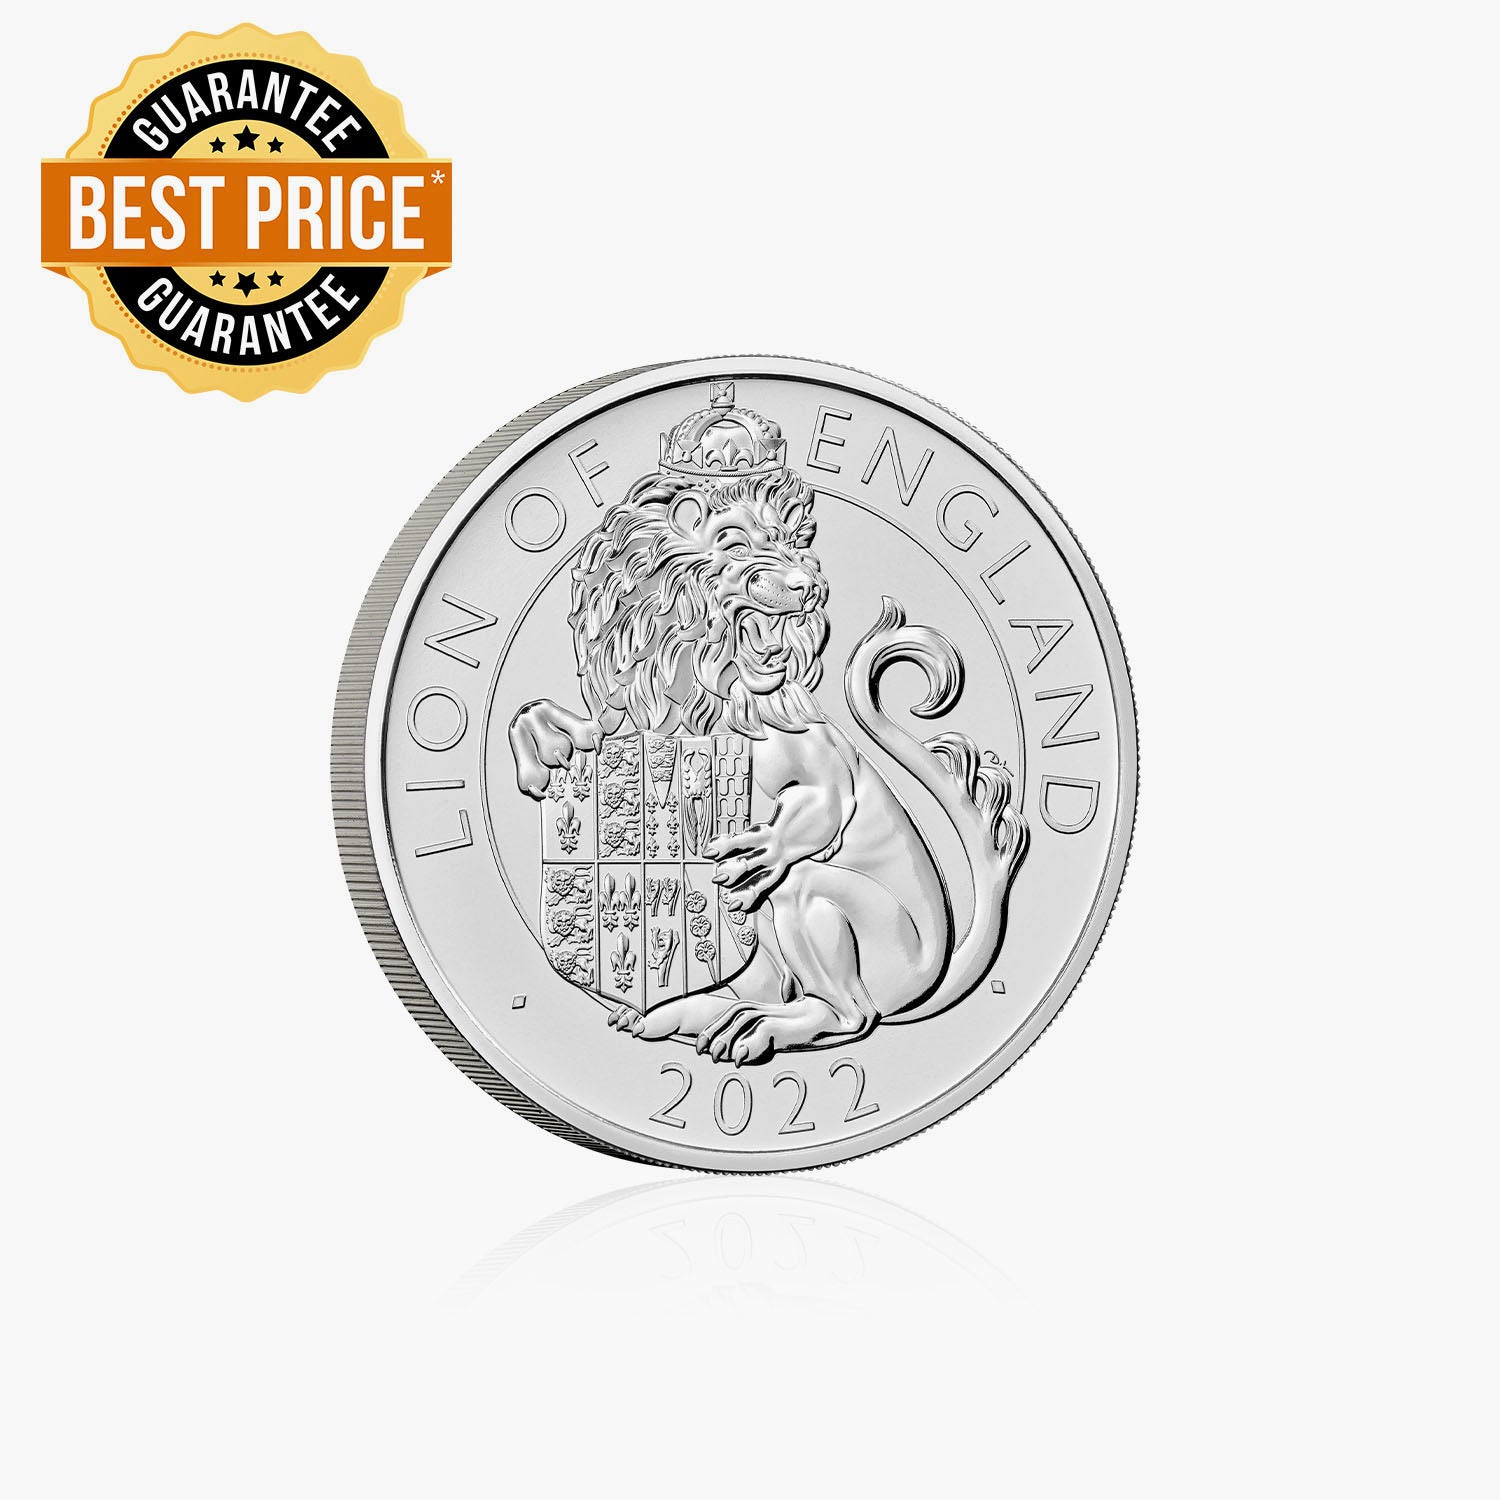 The 2022 Lion of England £5 Brilliant Uncirculated Coin